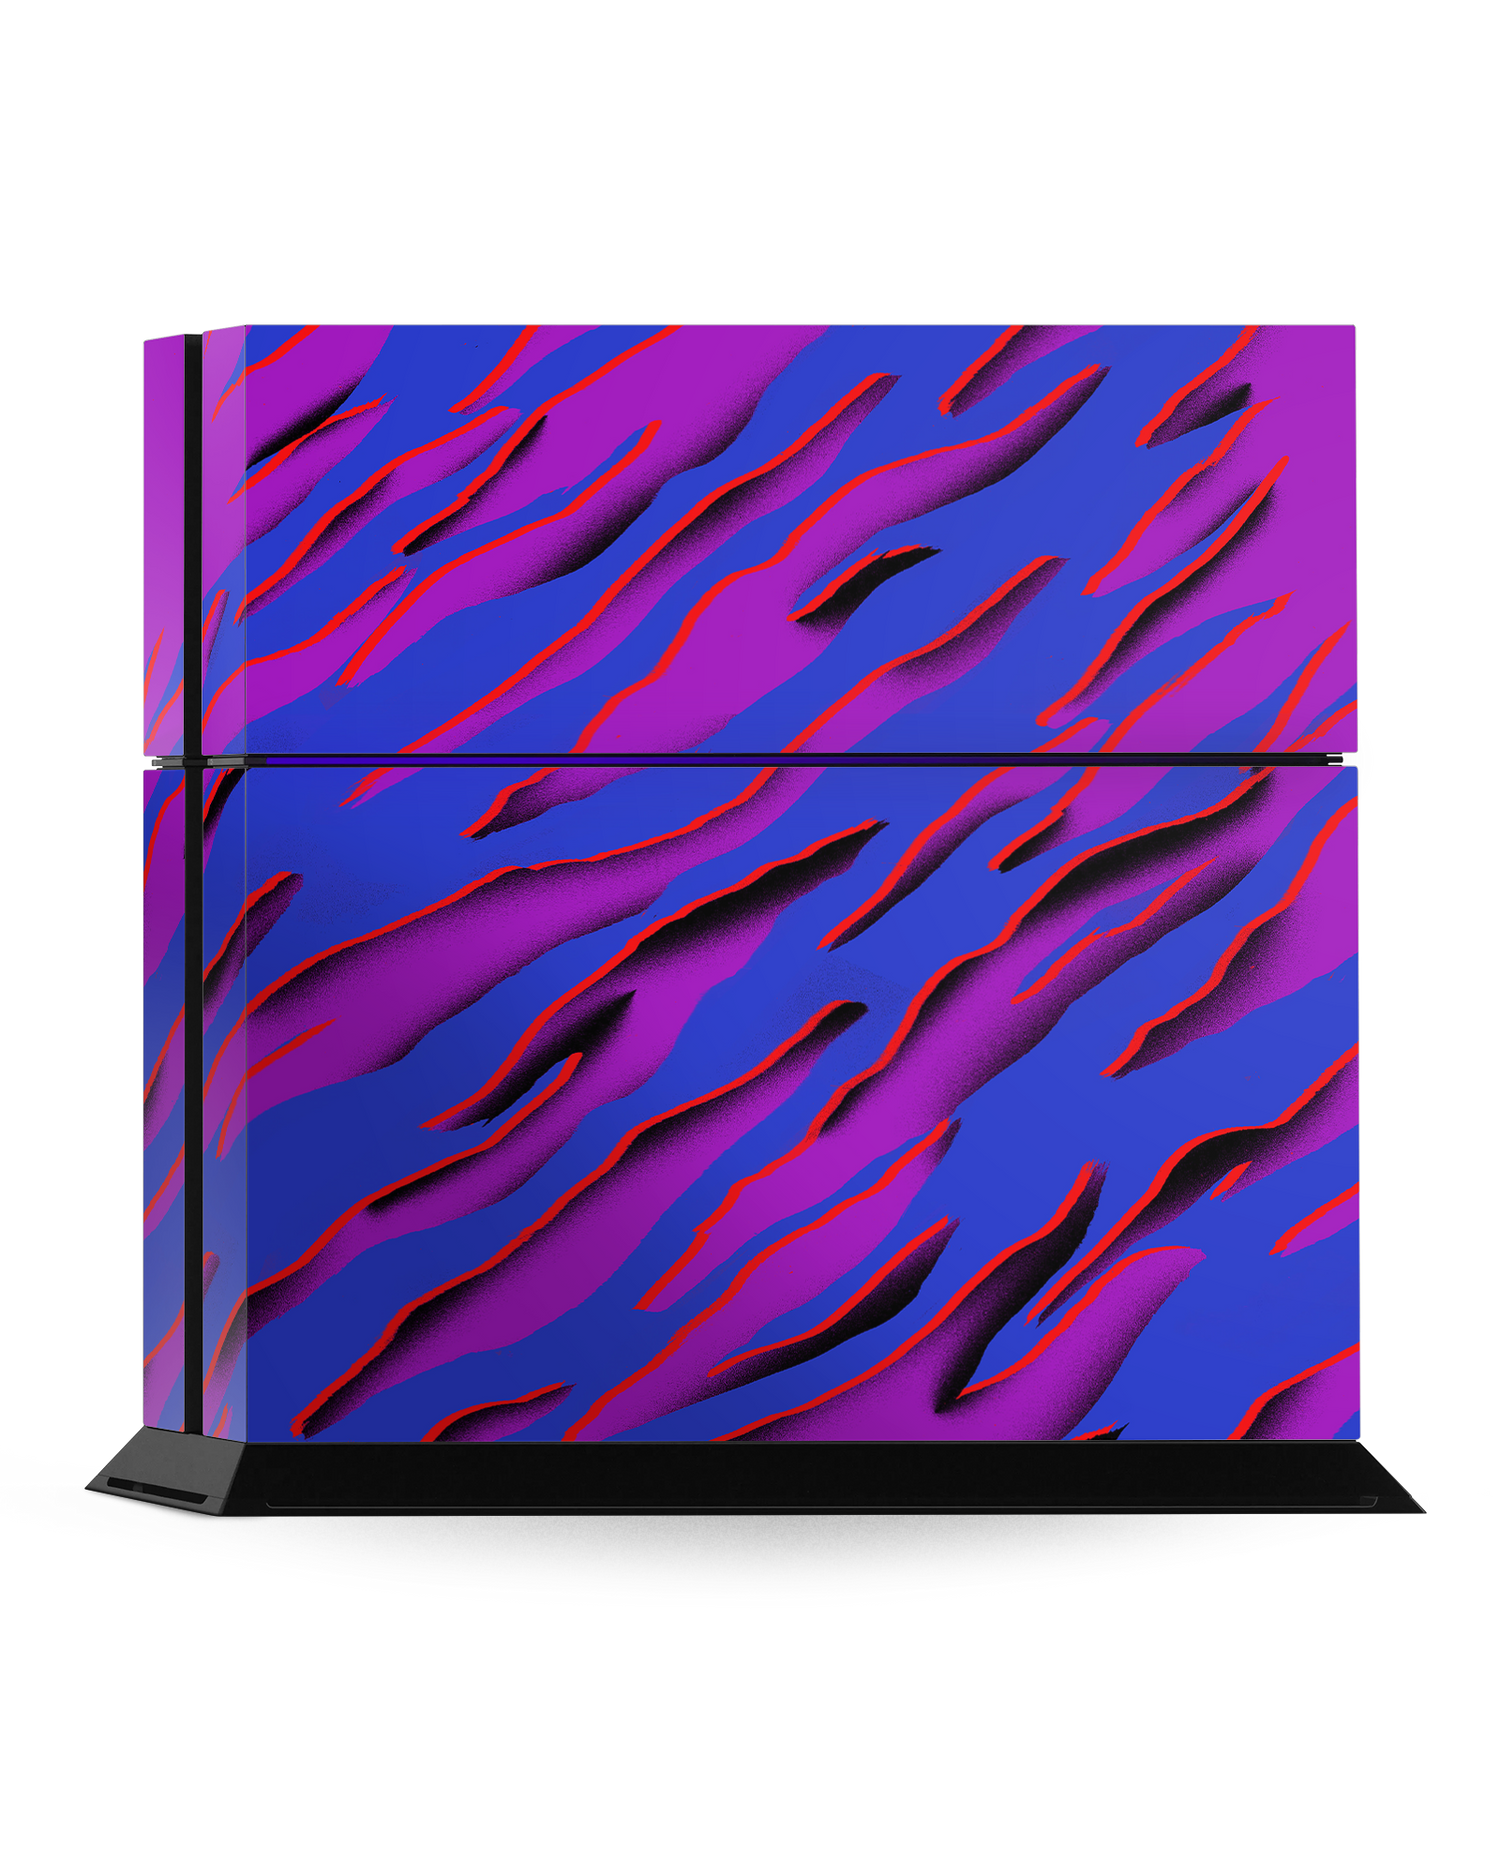 Electric Ocean 2 Console Skin for Sony PlayStation 4: Standing